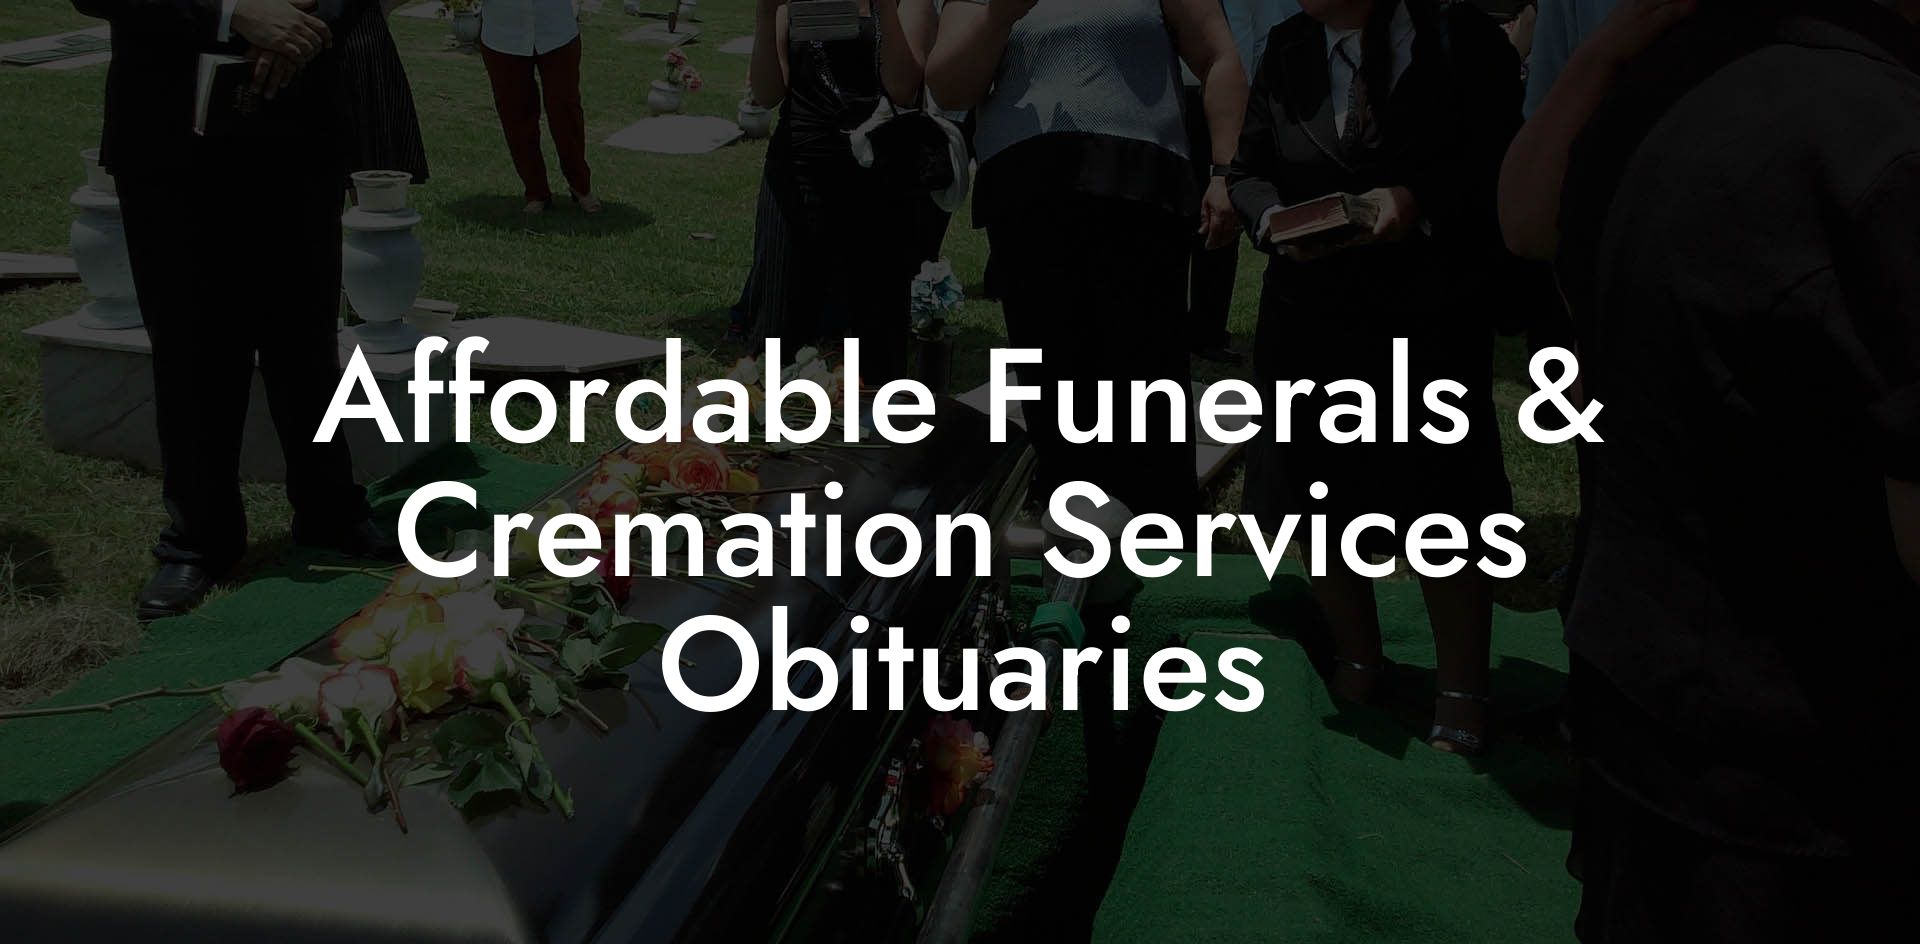 Affordable Funerals & Cremation Services Obituaries